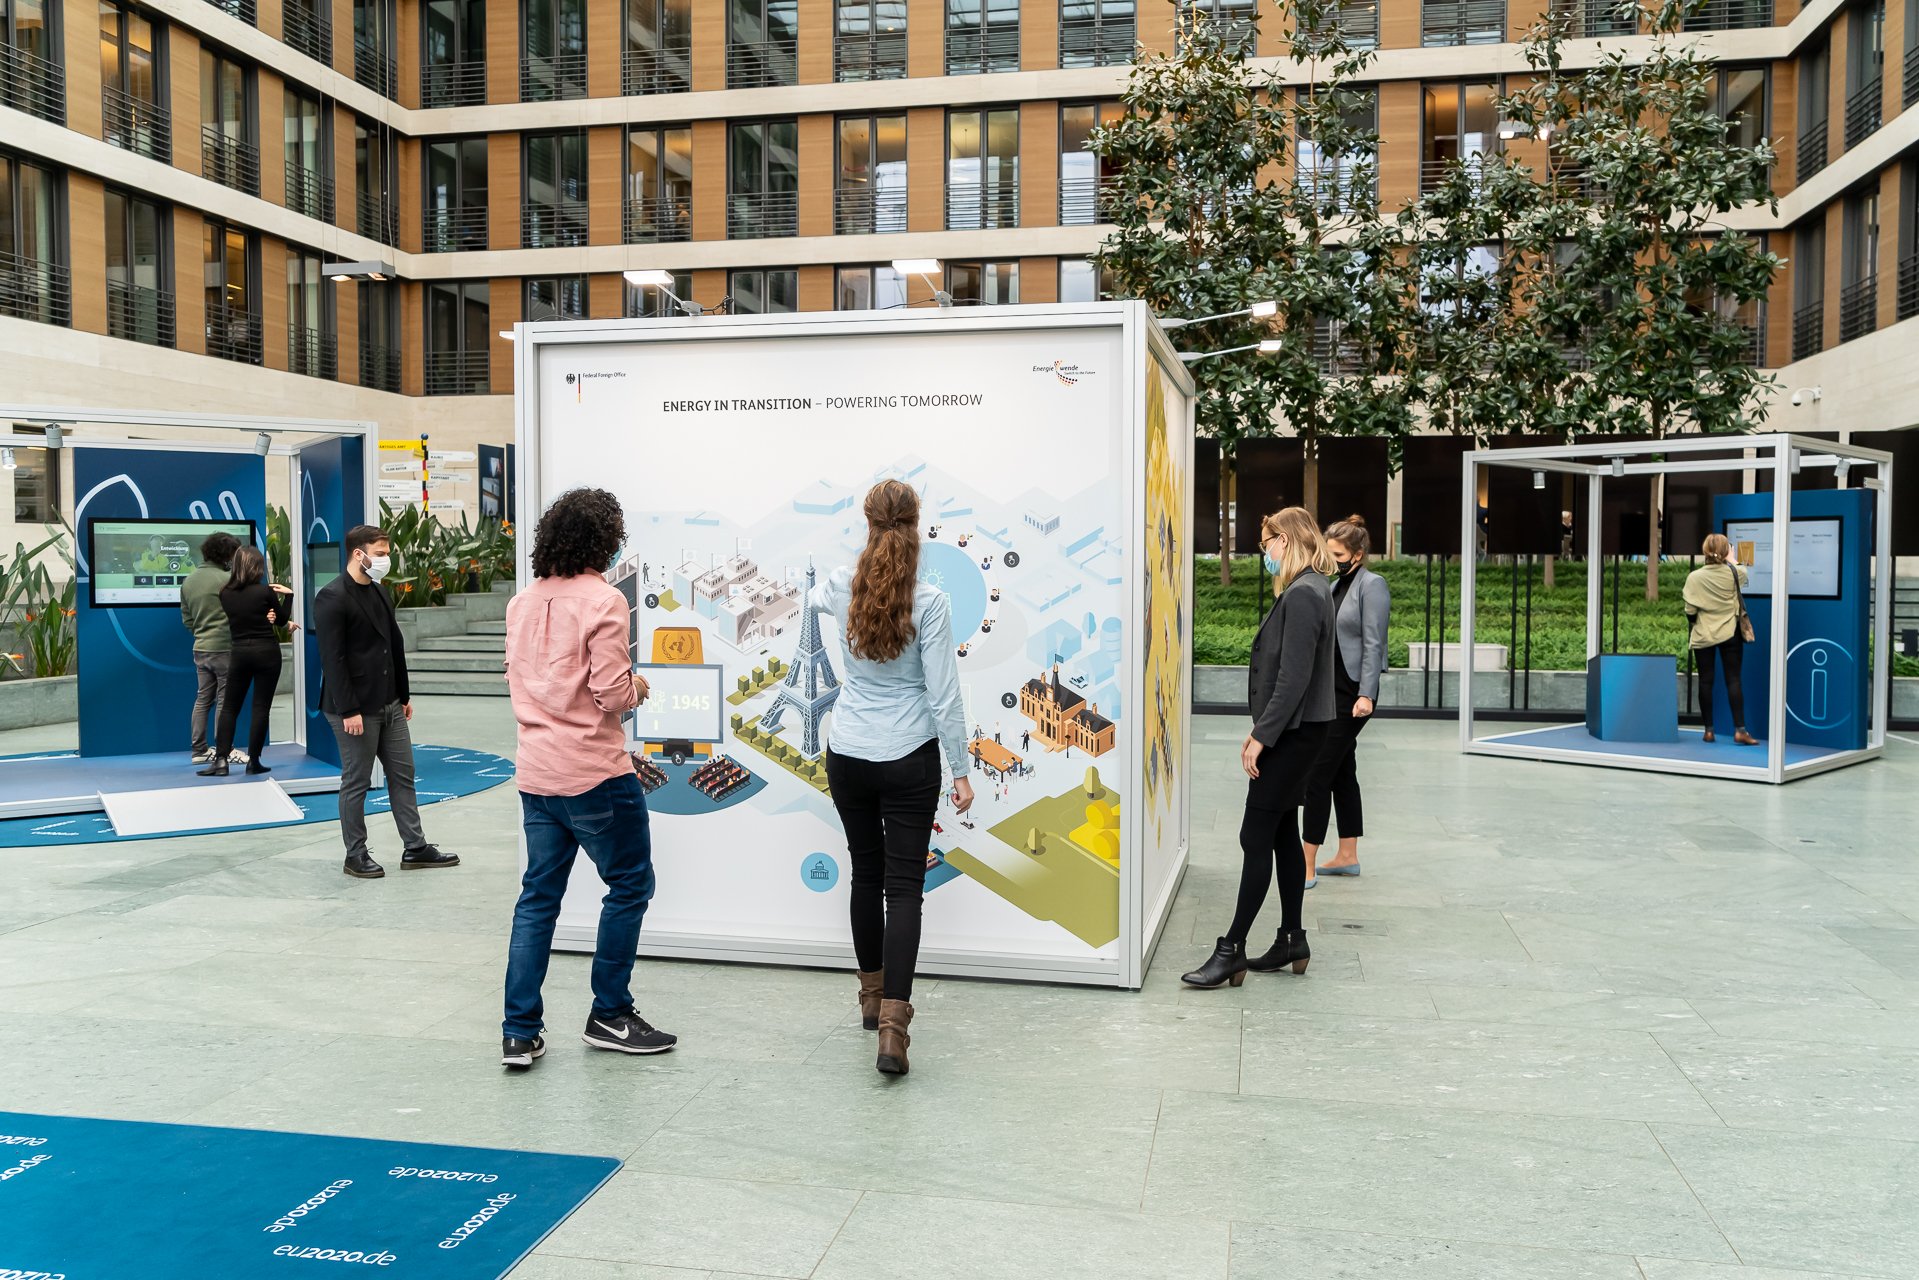 A snapshot of visitors at the travelling exhibition. The cube-shaped Energy in Transition station is in the foreground. Visitors are standing at the different sides of the cube and are pointing at and viewing the cube’s animations that are lighting up. In the background you can see visitors standing at the other stations.